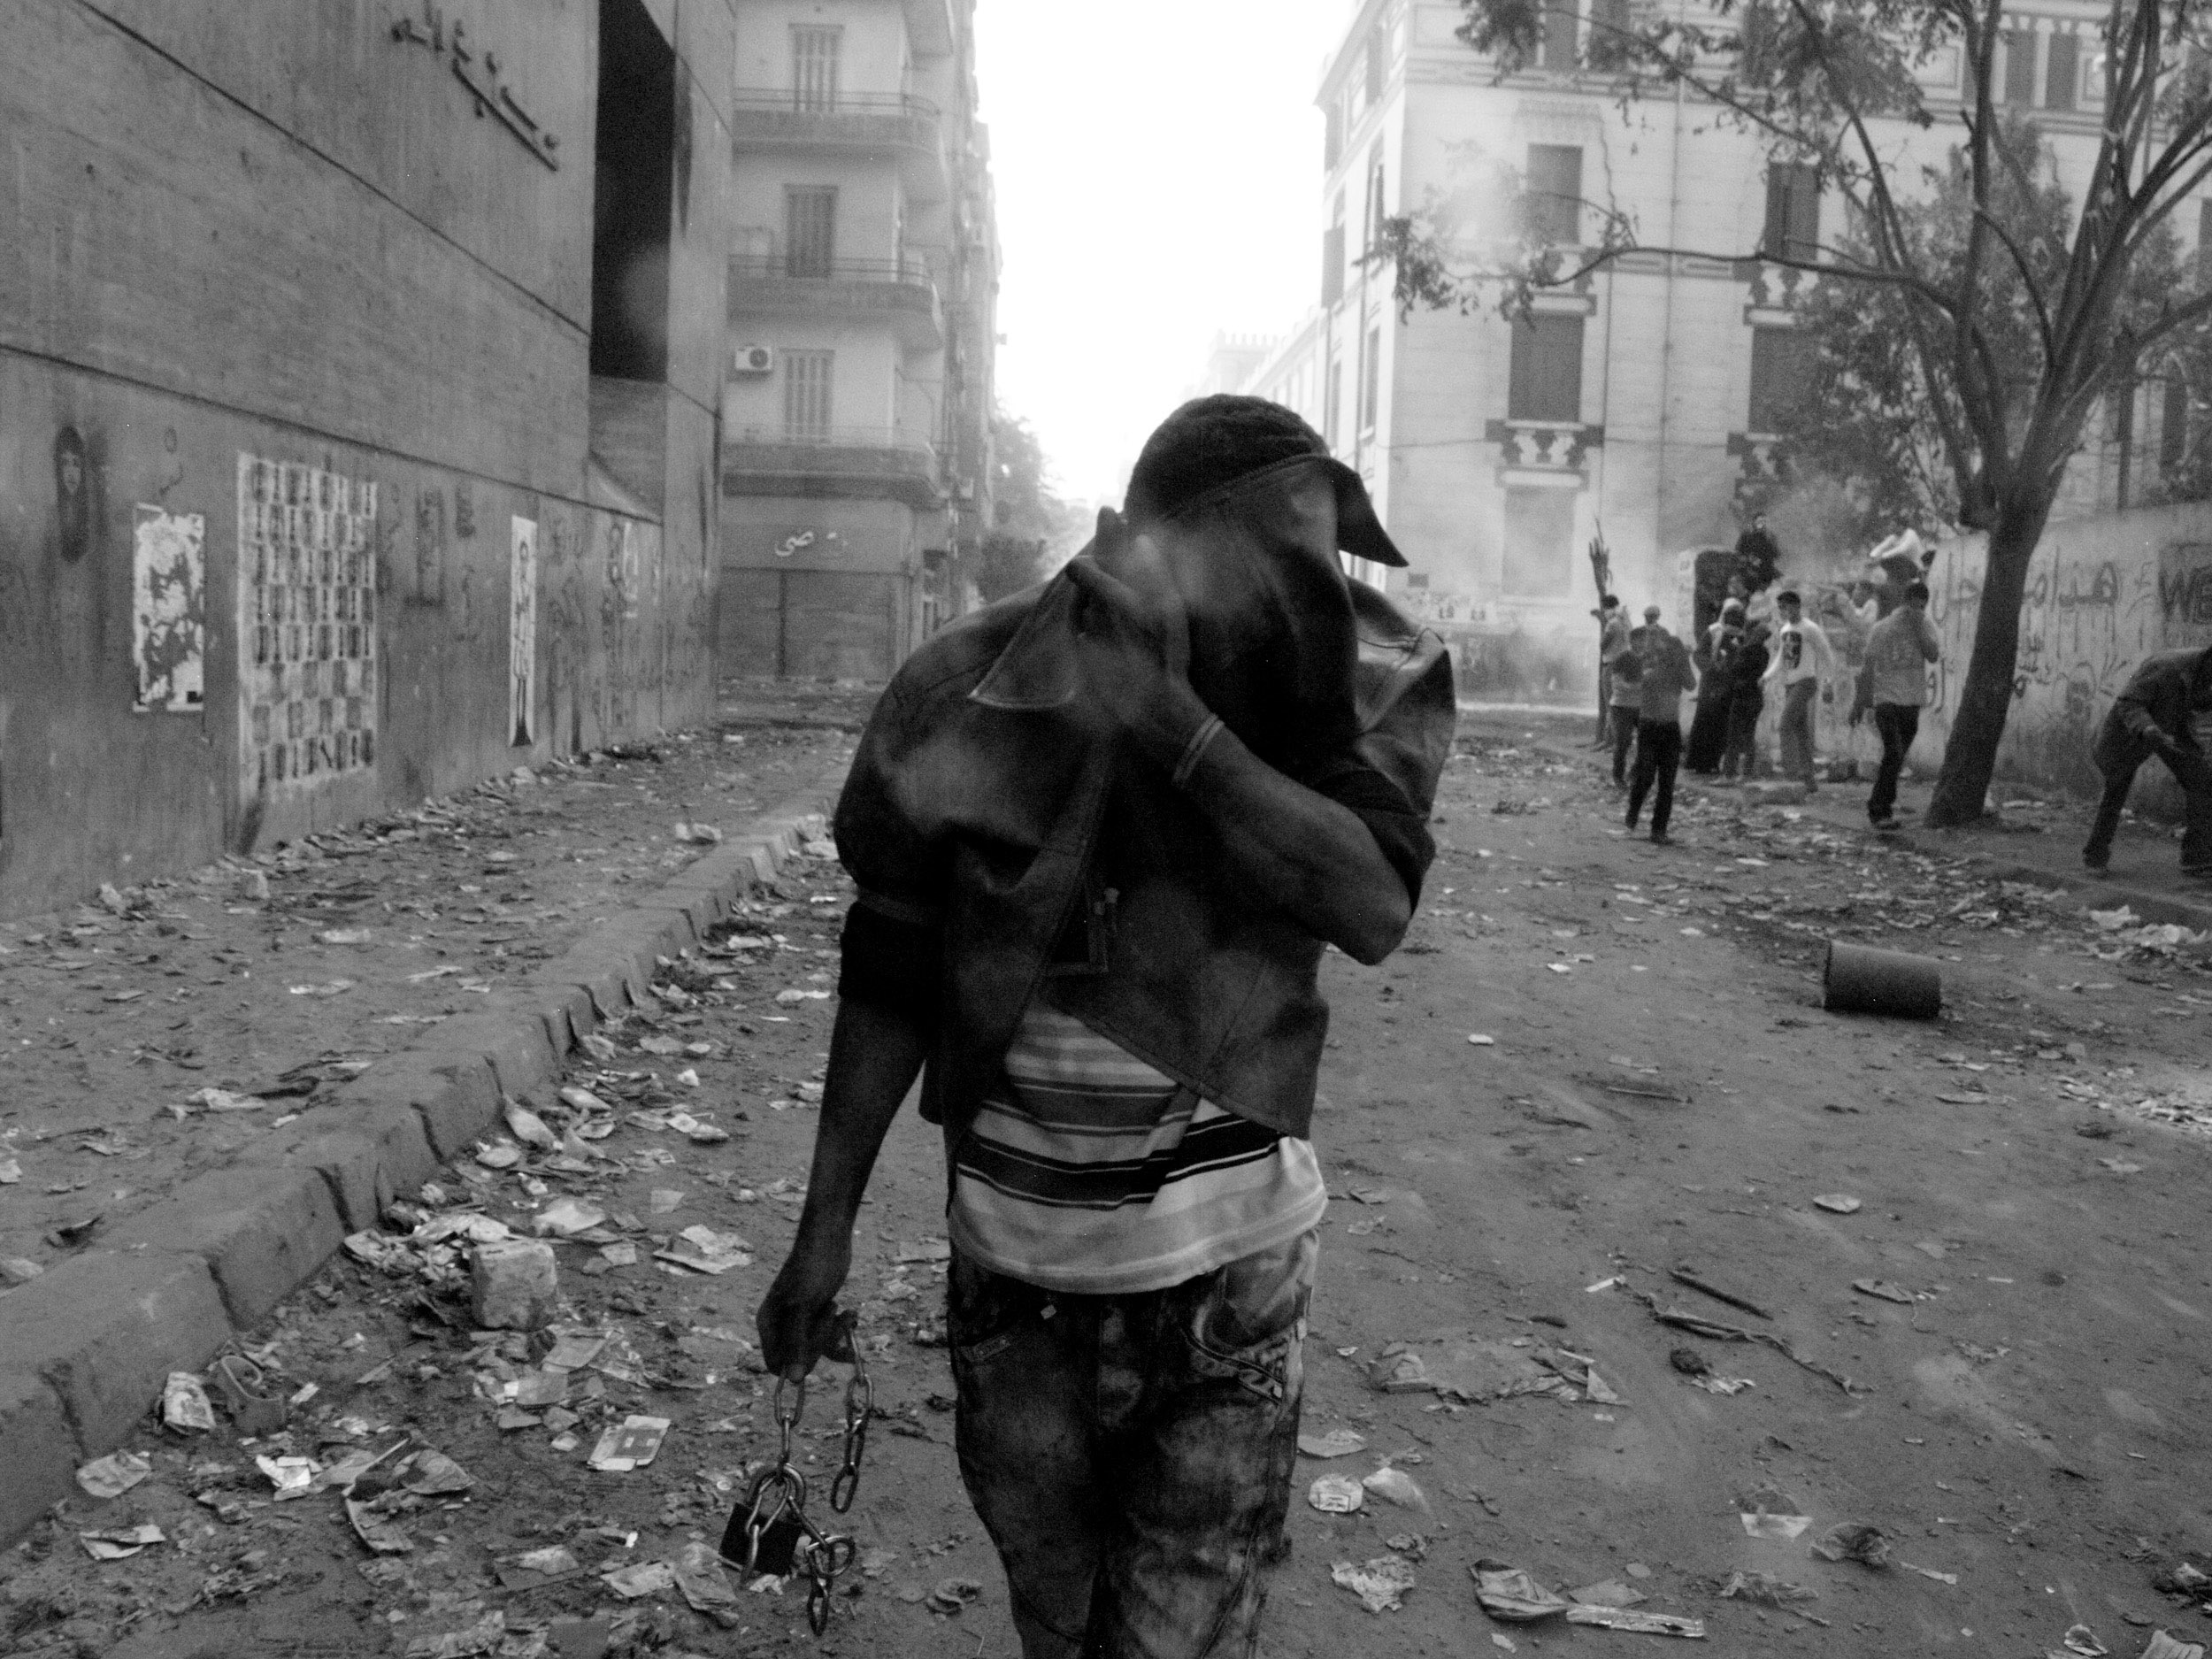 CAIRO.EGYPT.22/11/2011. A man tries to protect themselves from tear gas with the bow jacket in Mohamed Mahmoud st. Protesters during clashes with the Egyptian riot police near Tahrir square in Cairo. Egypt's civilian Cabinet has offered to resign after three days of violent clashes in many cities between demonstrators and security forces, but the action failed to satisfy protesters deeply frustrated with the new military rulers.(GABRIELE MICALIZZI/FOR NYTIMES MAGAZINE)